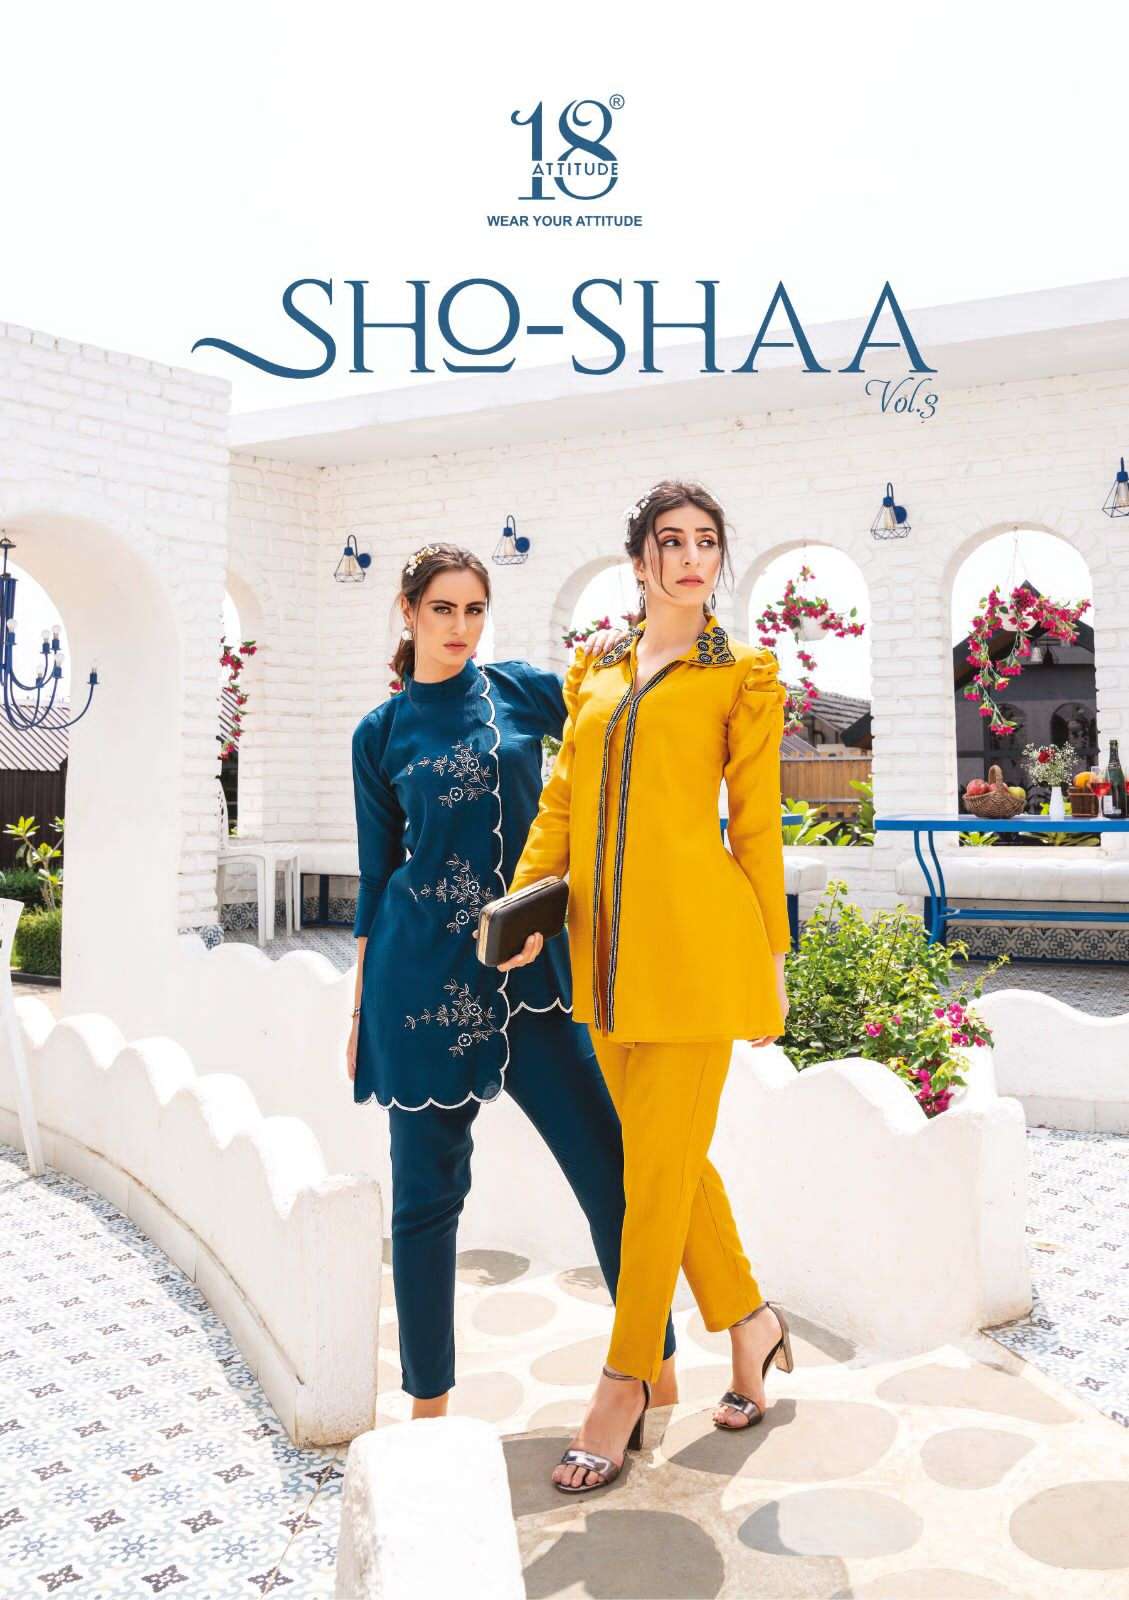 18 attitude present sho shaa vol 3 fancy co-ord set indo western readymade top and bottom